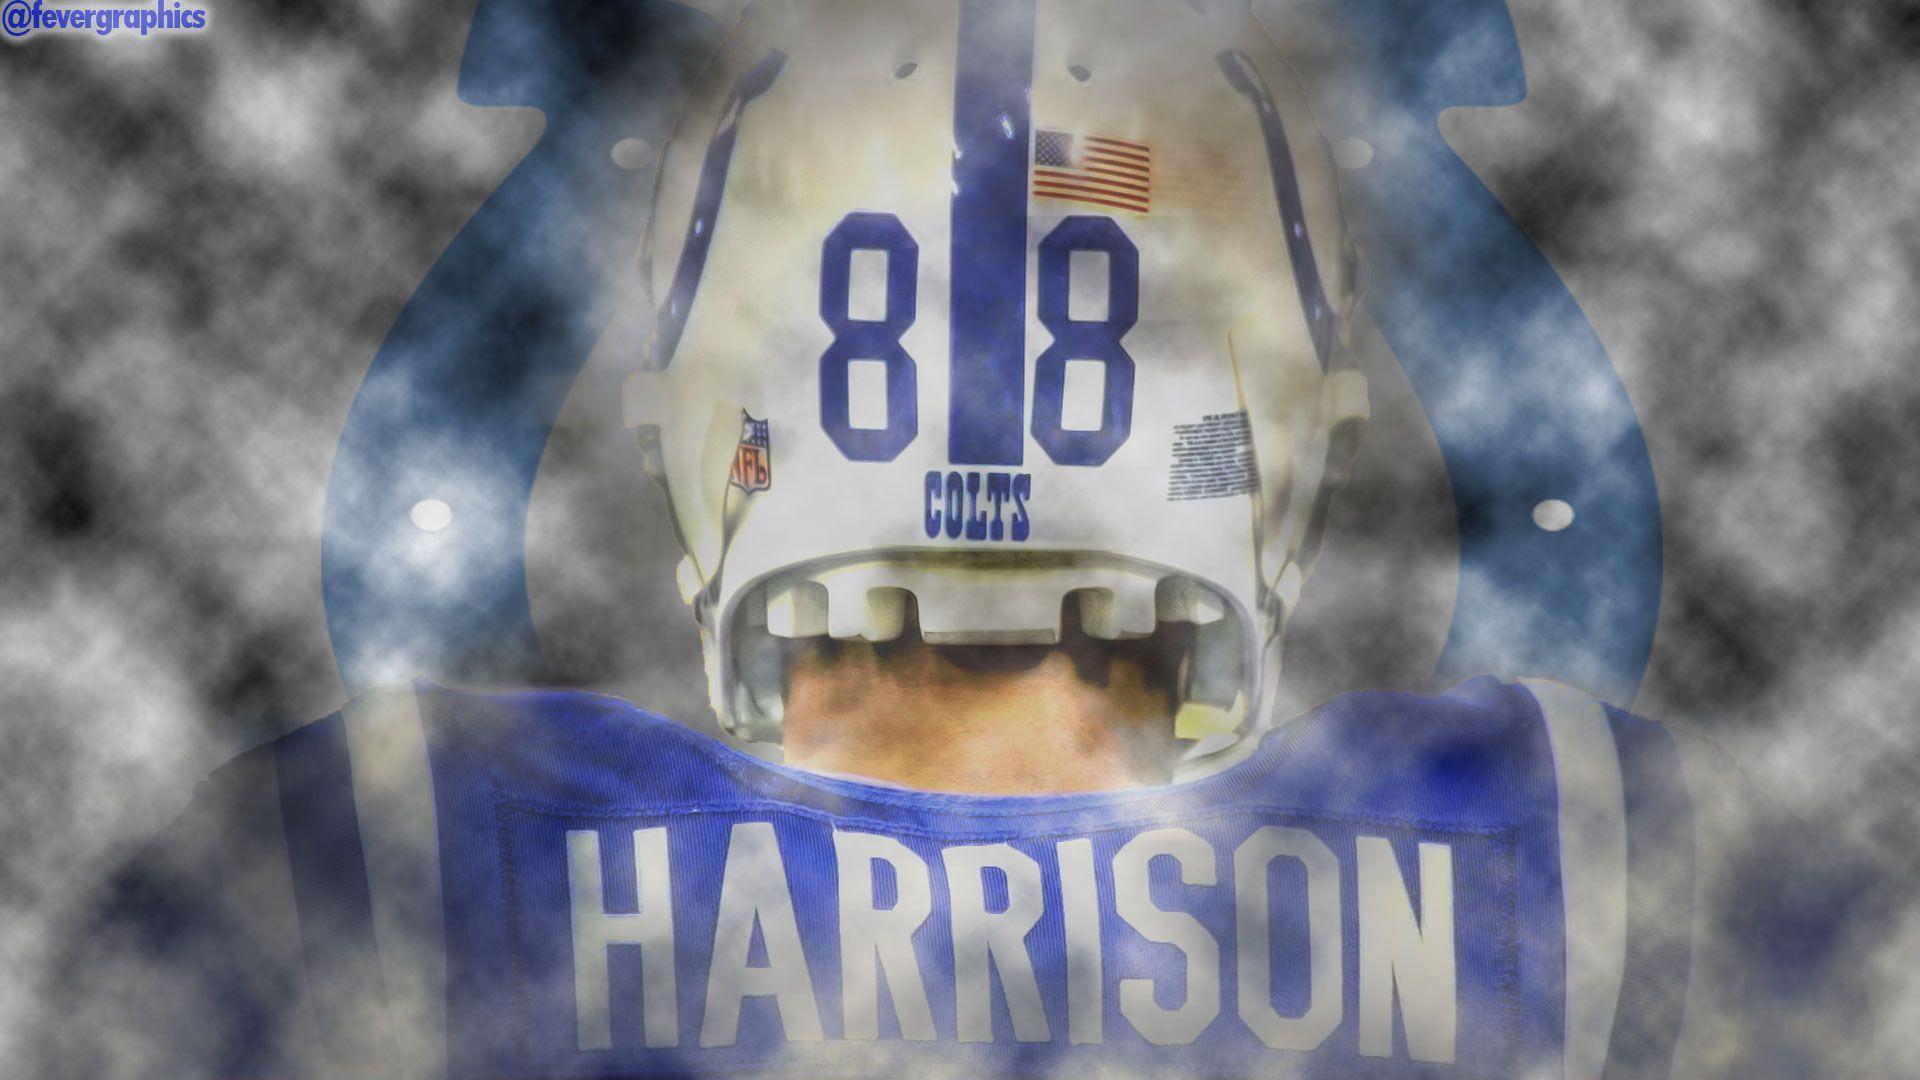 Made your sub a Marvin Harrison wallpaper! One of my favorite